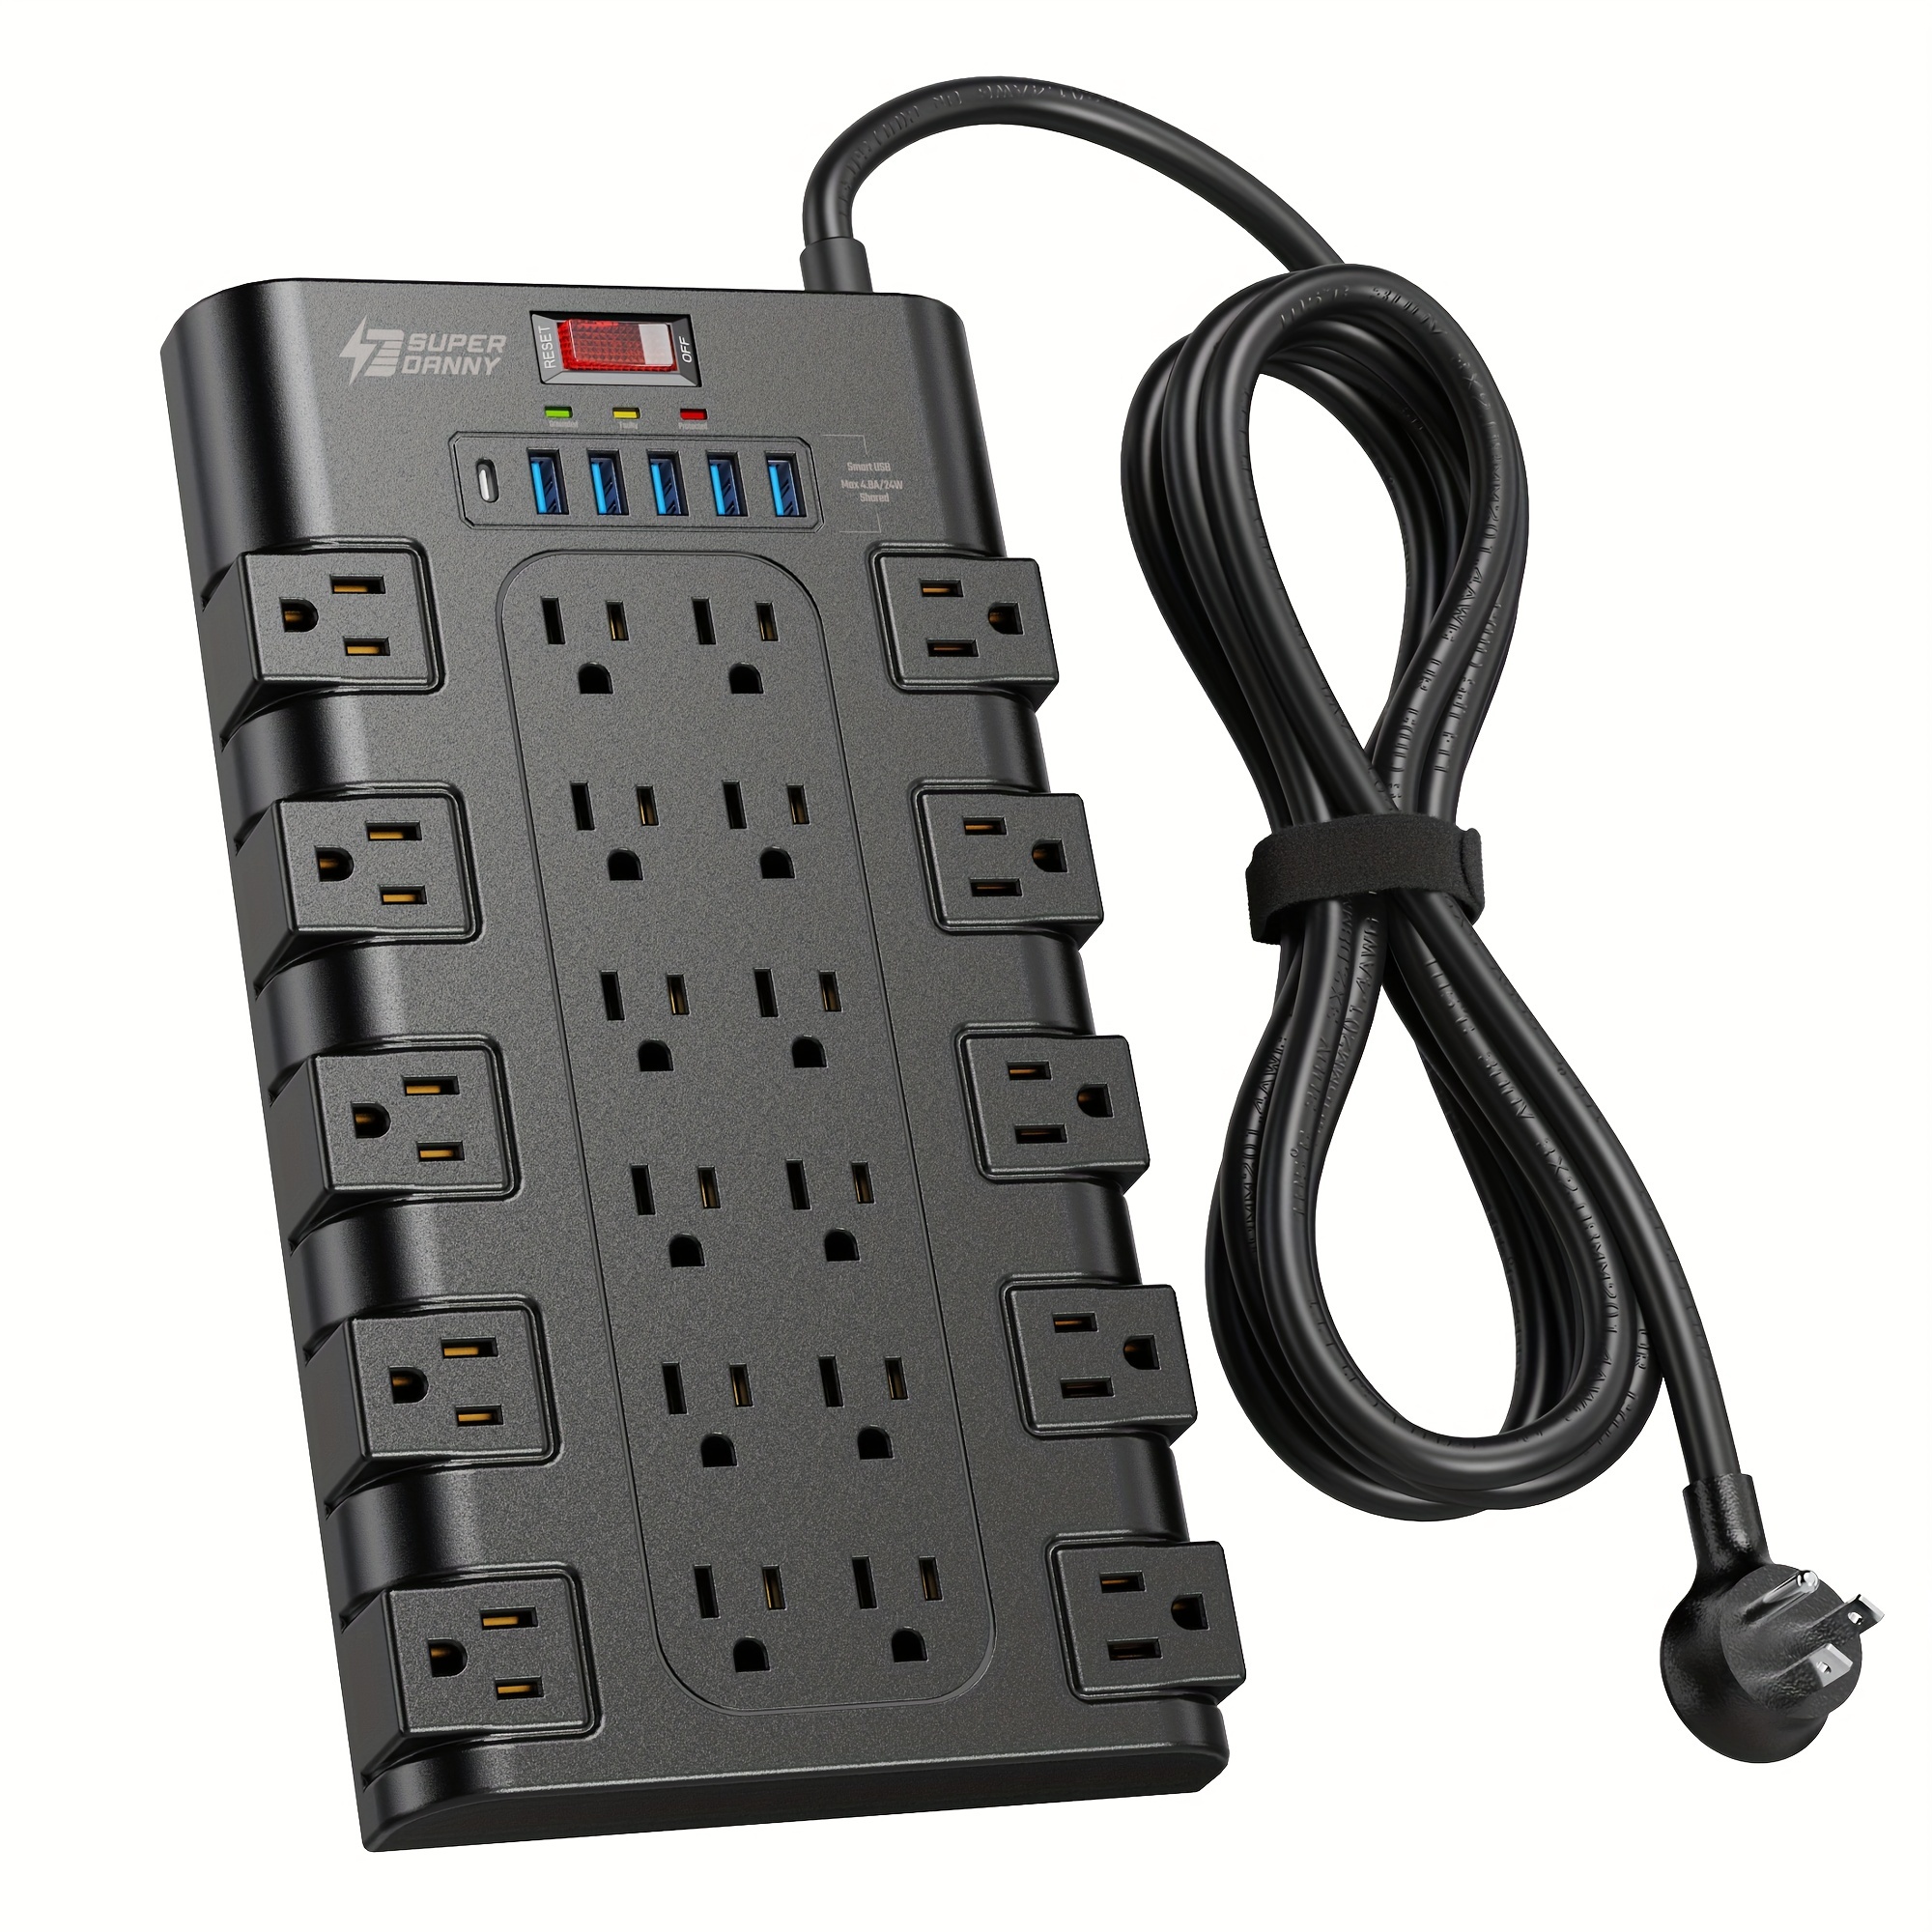 12 AC Power Strip Tower with 6 USB A, 6.5ft Cable white [Plug Type B]